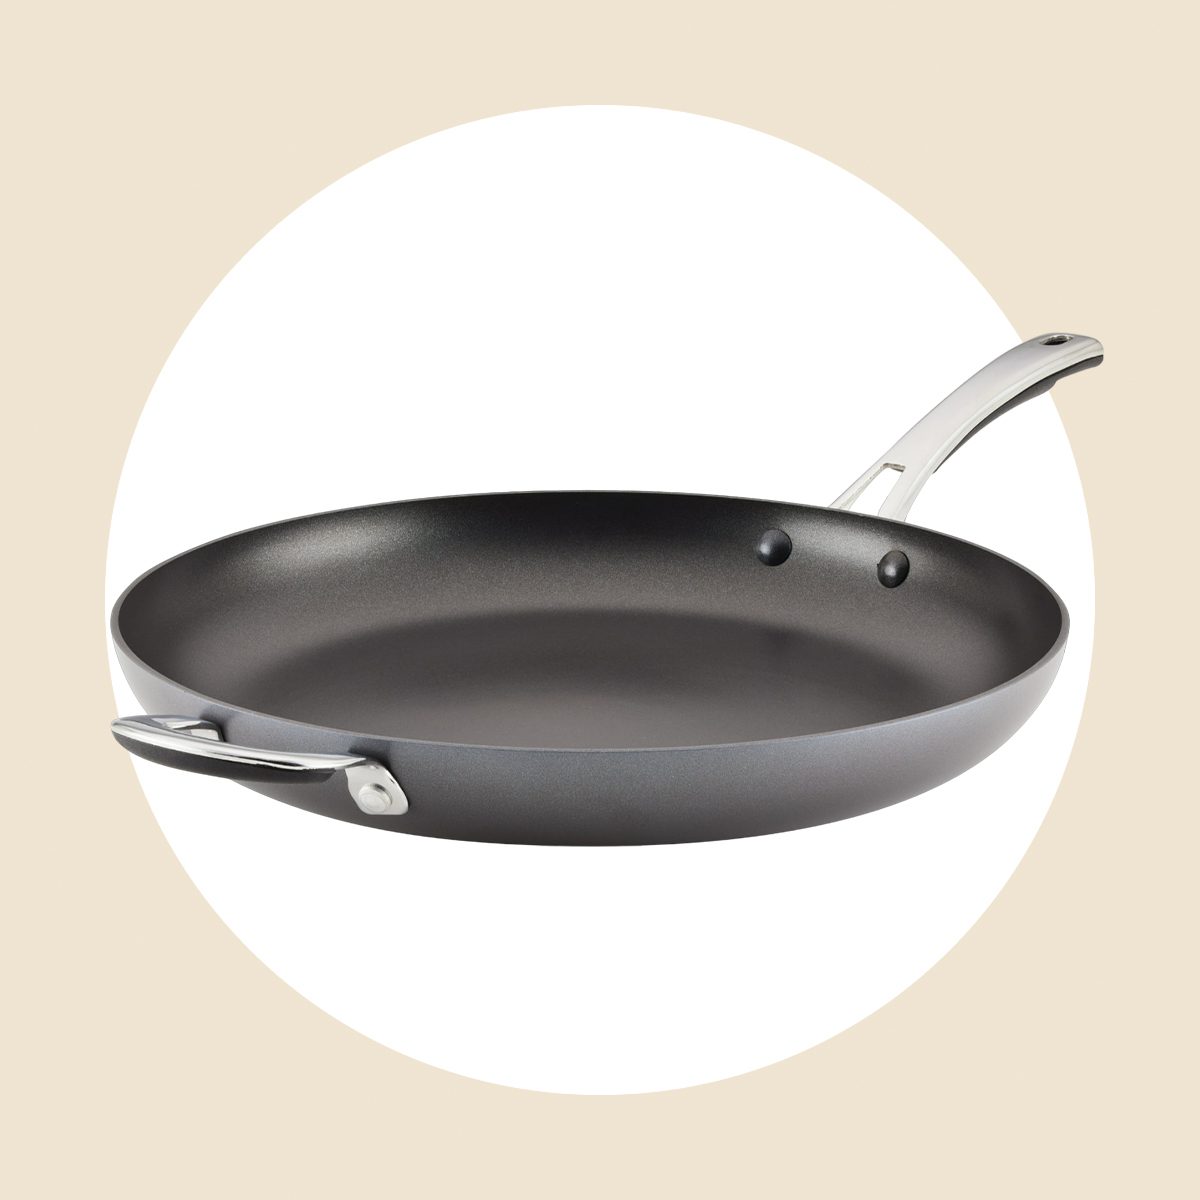 The 10 Best Celebrity Cookware Pieces of 2023